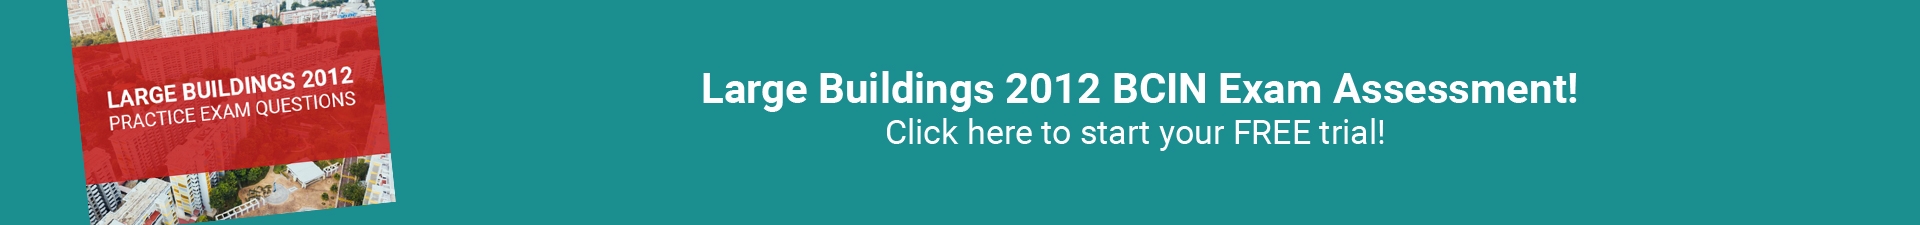 Large Buildings 2012 Free Assessment